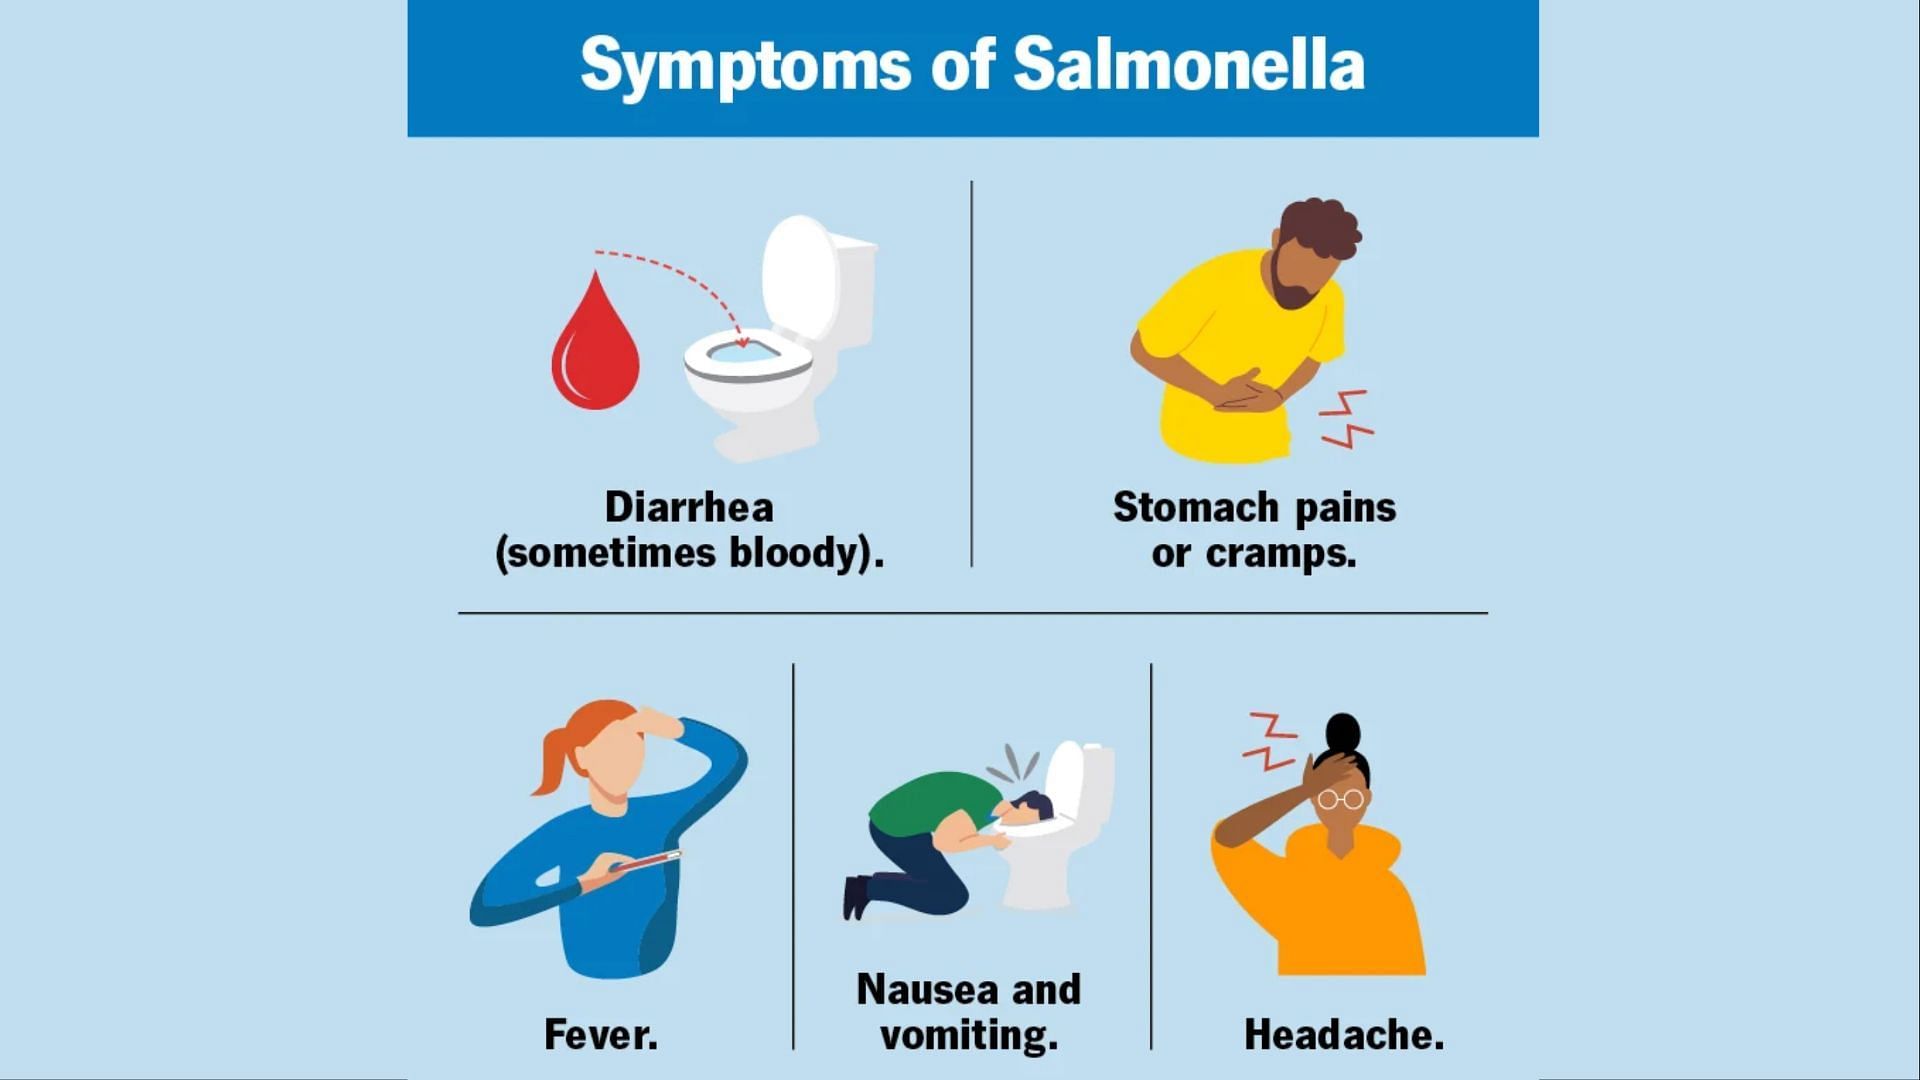 Symptoms of a Salmonella infection (Image via Cleveland Clinic)